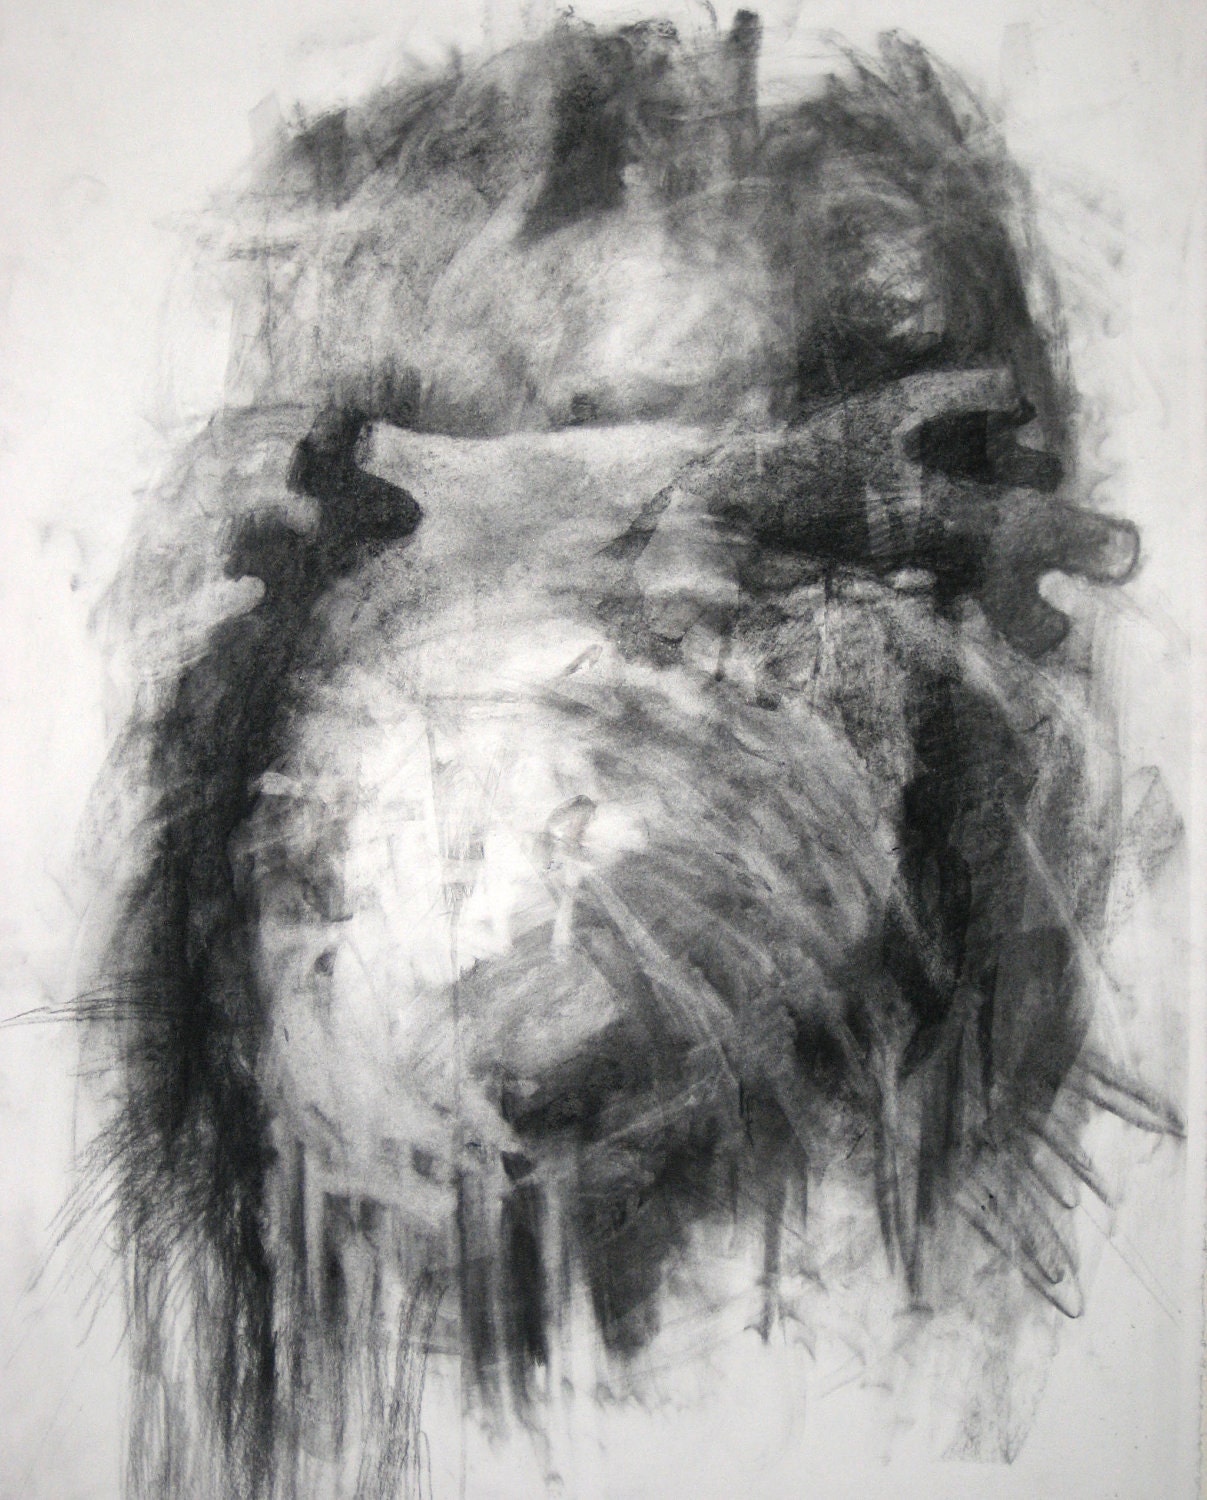 Heart Charcoal Drawing 22 x 28